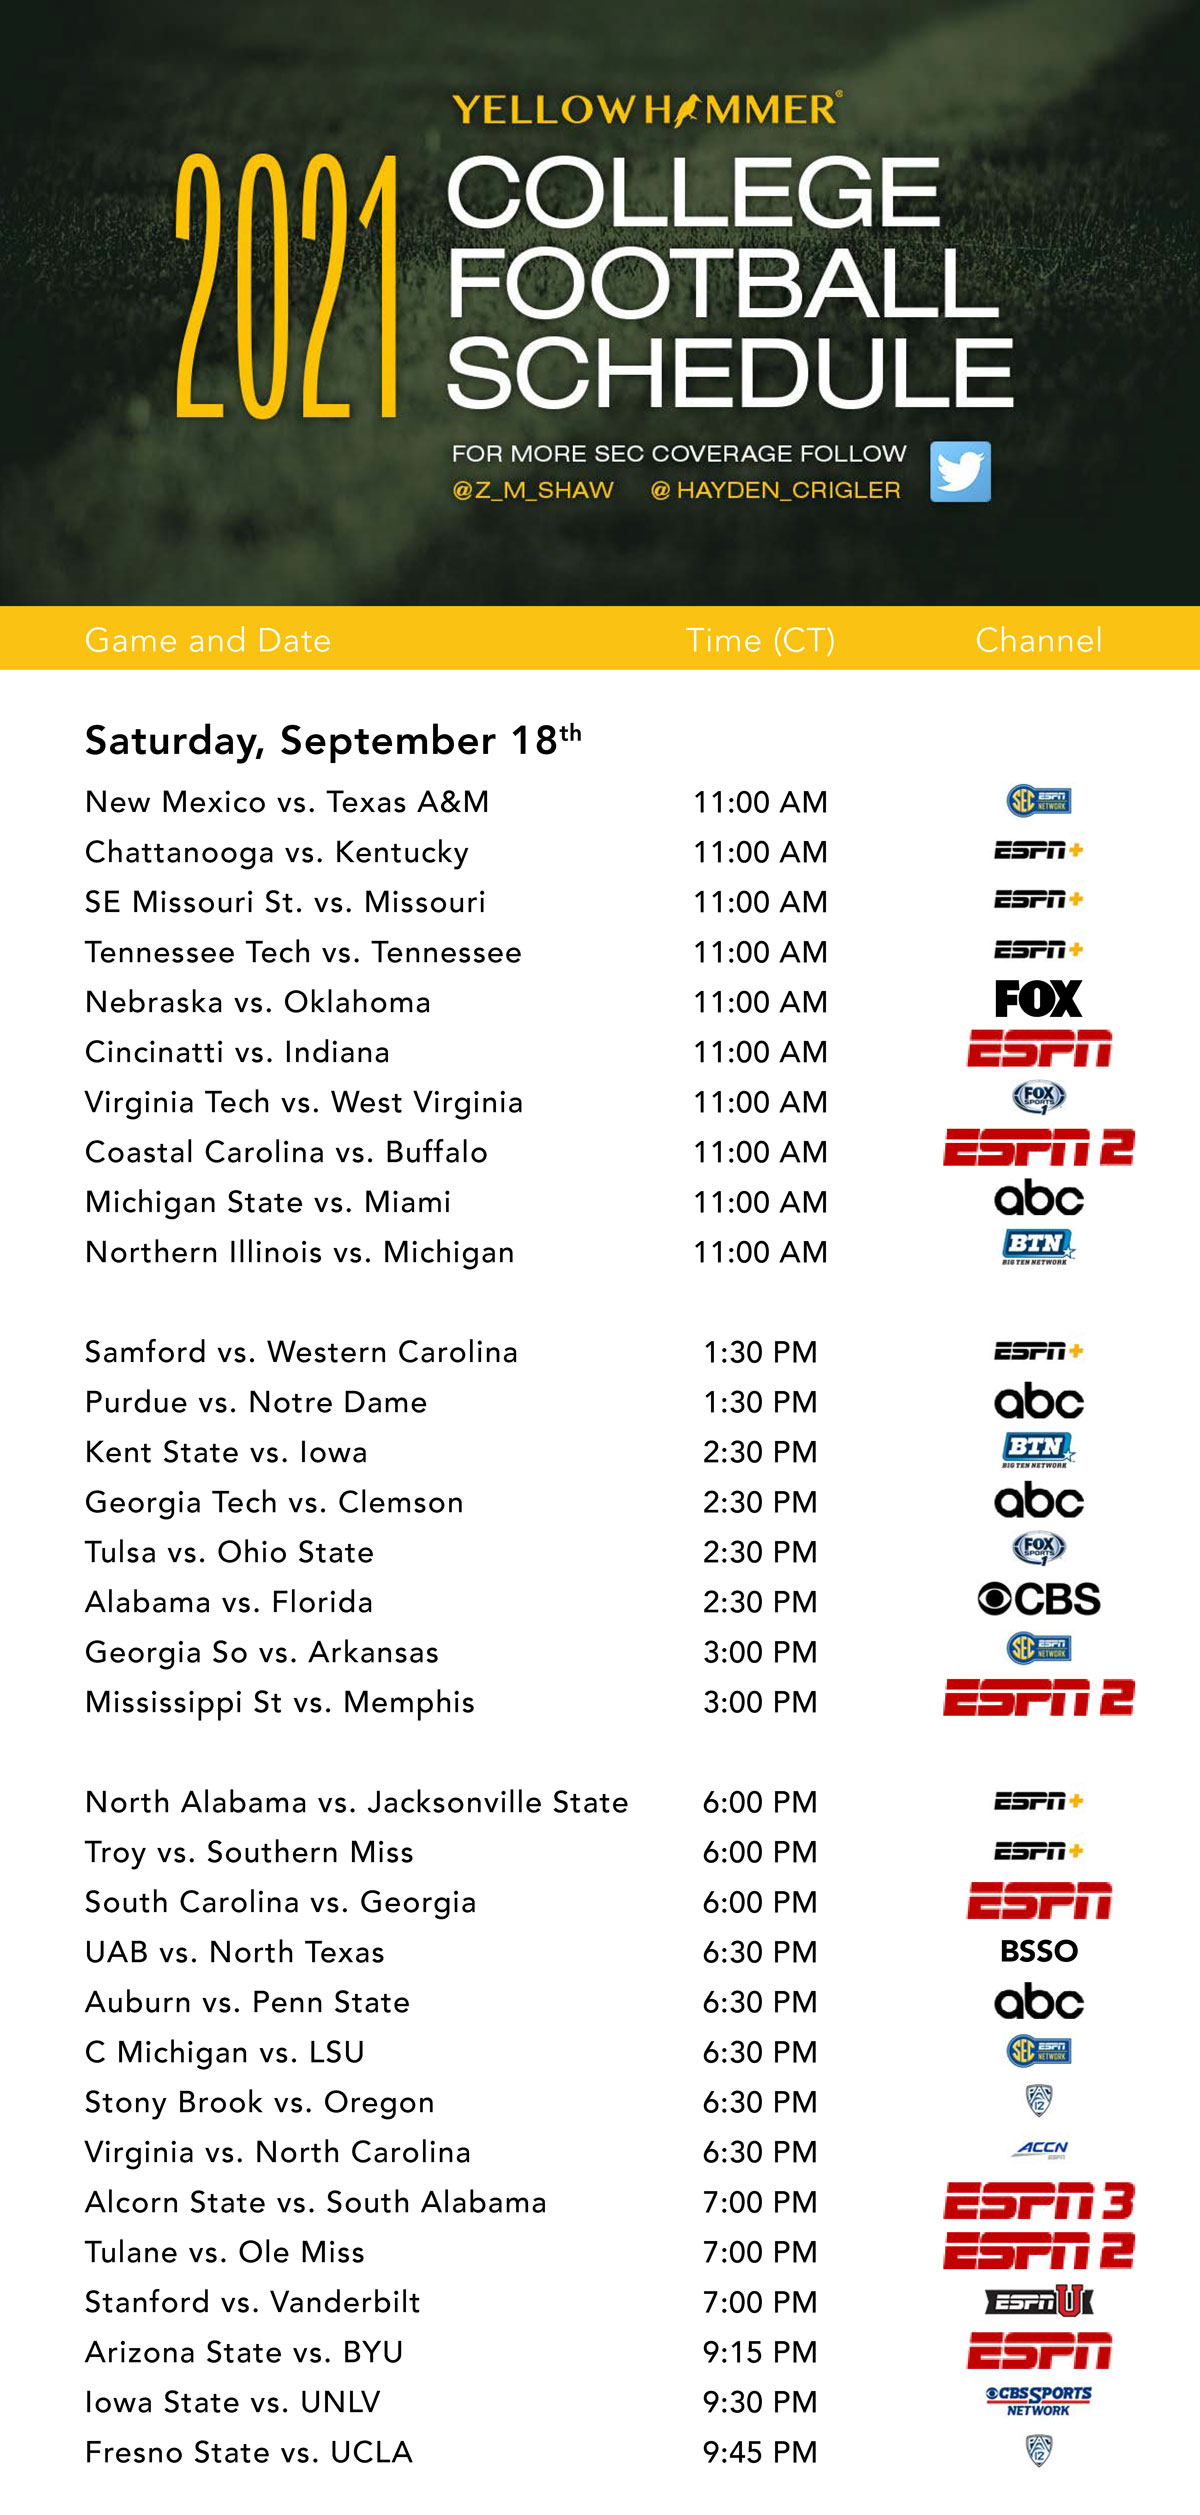 College football TV schedule and times